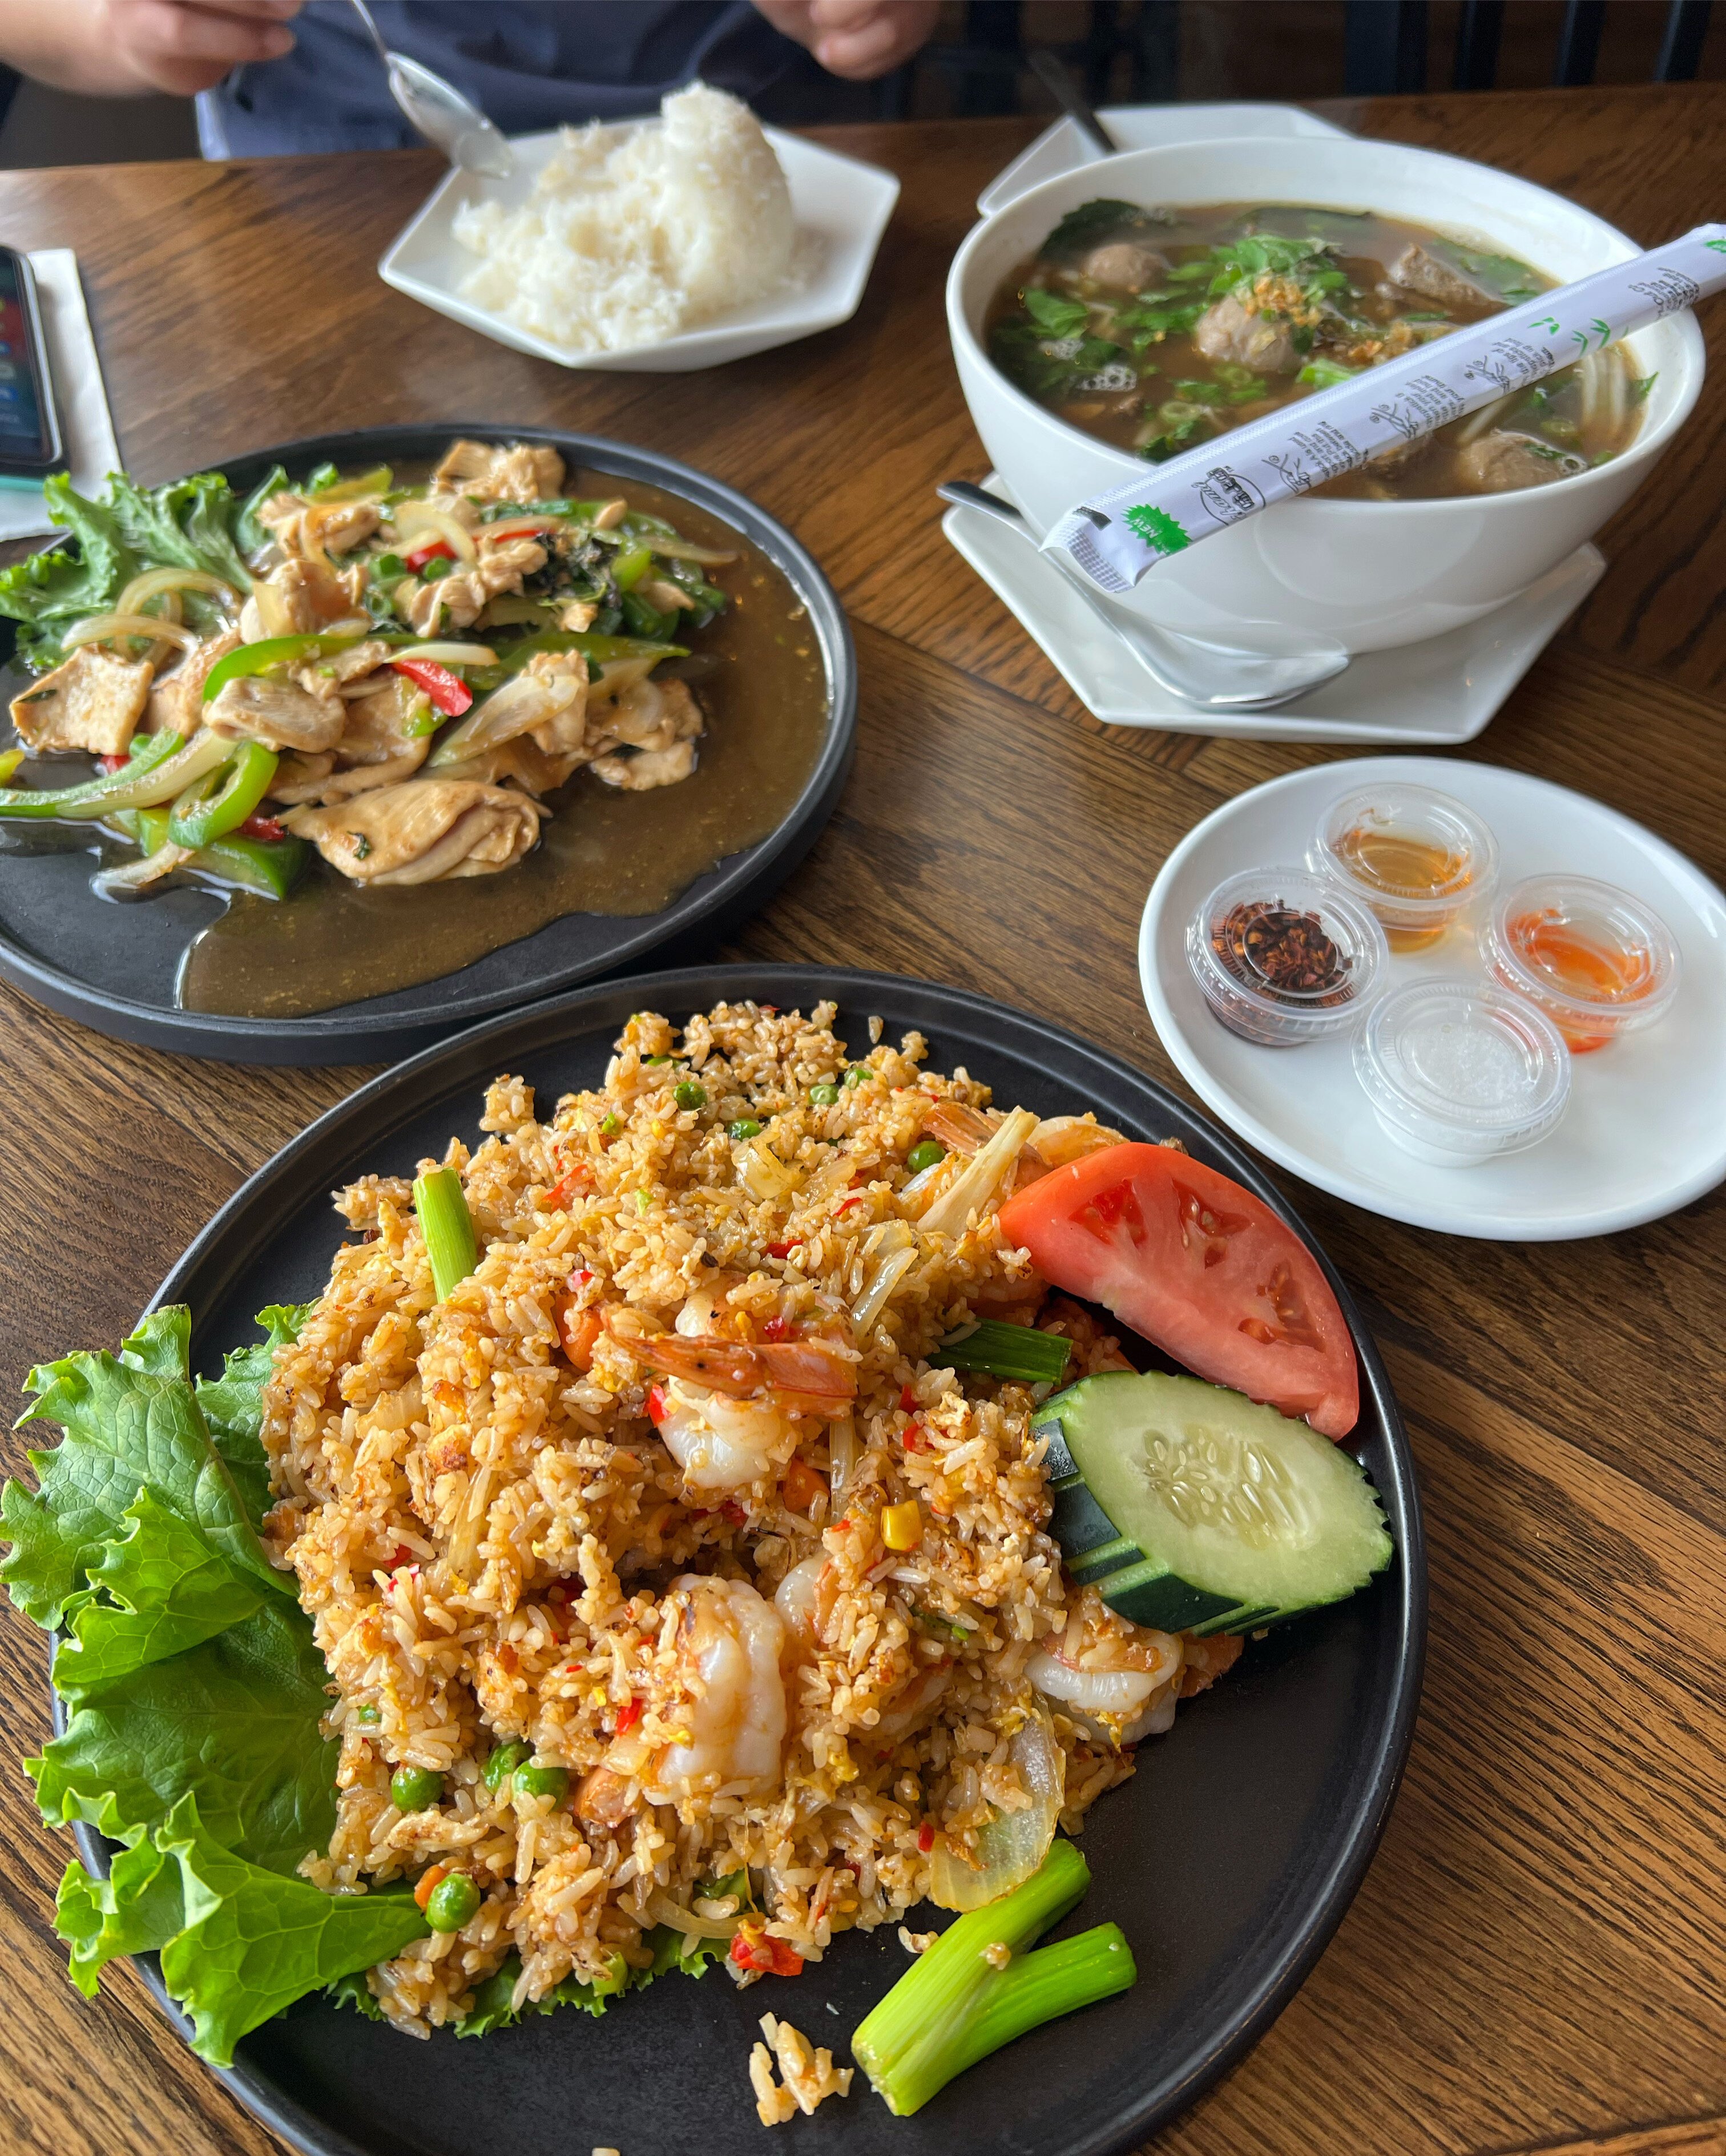 Shrimp Tomalley Fried Rice, Wall Street Basil Stir-Fry, and Noodle Soup from Bangkok Bistro.